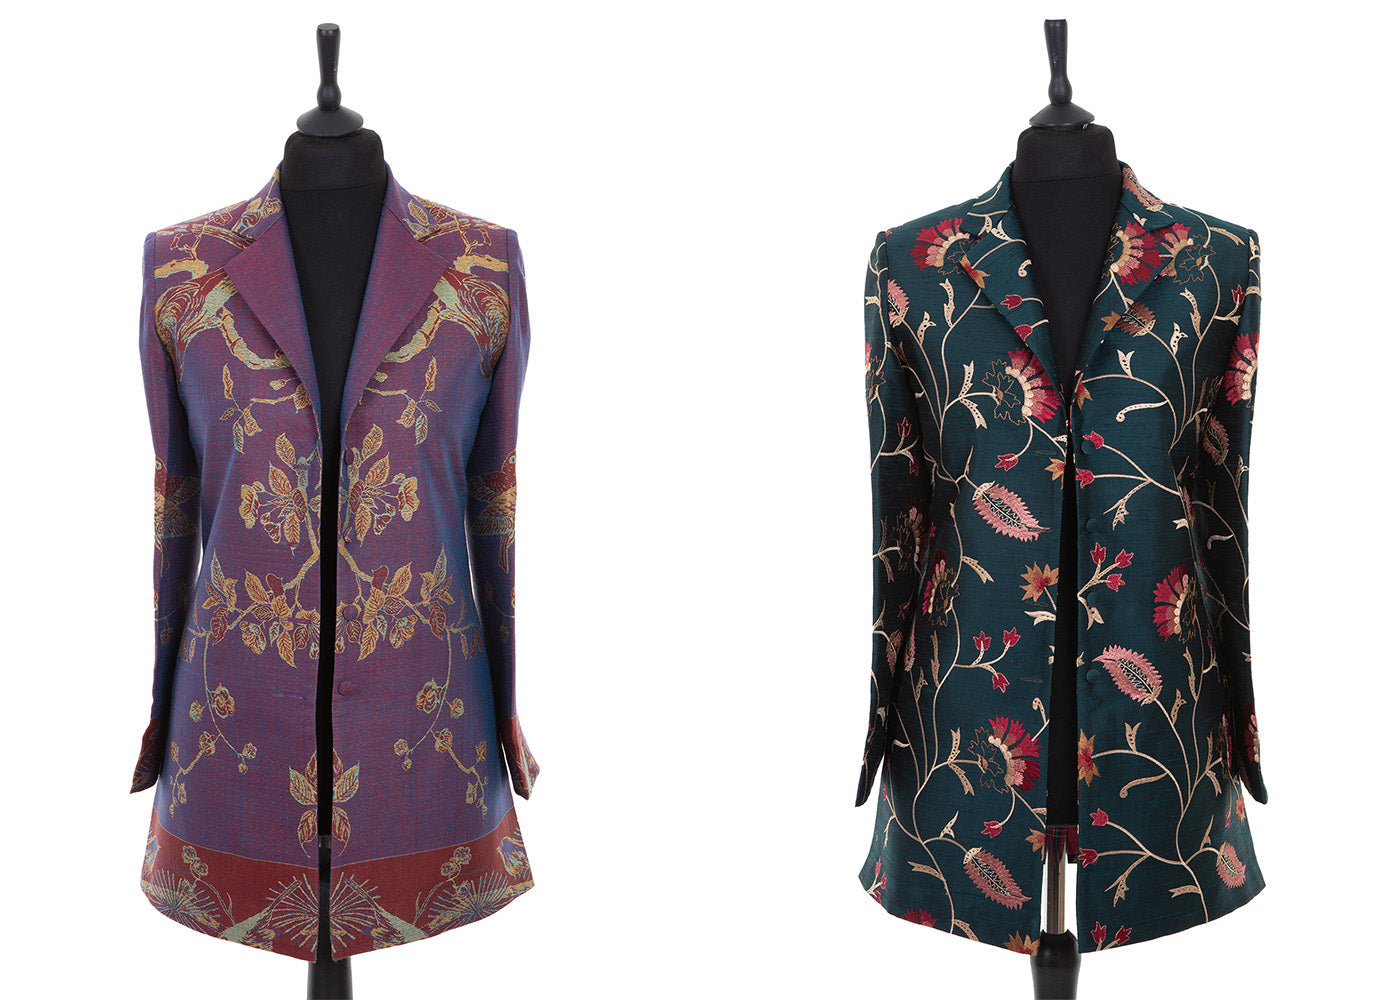 Cashmere and embroidered silk blazer style jackets